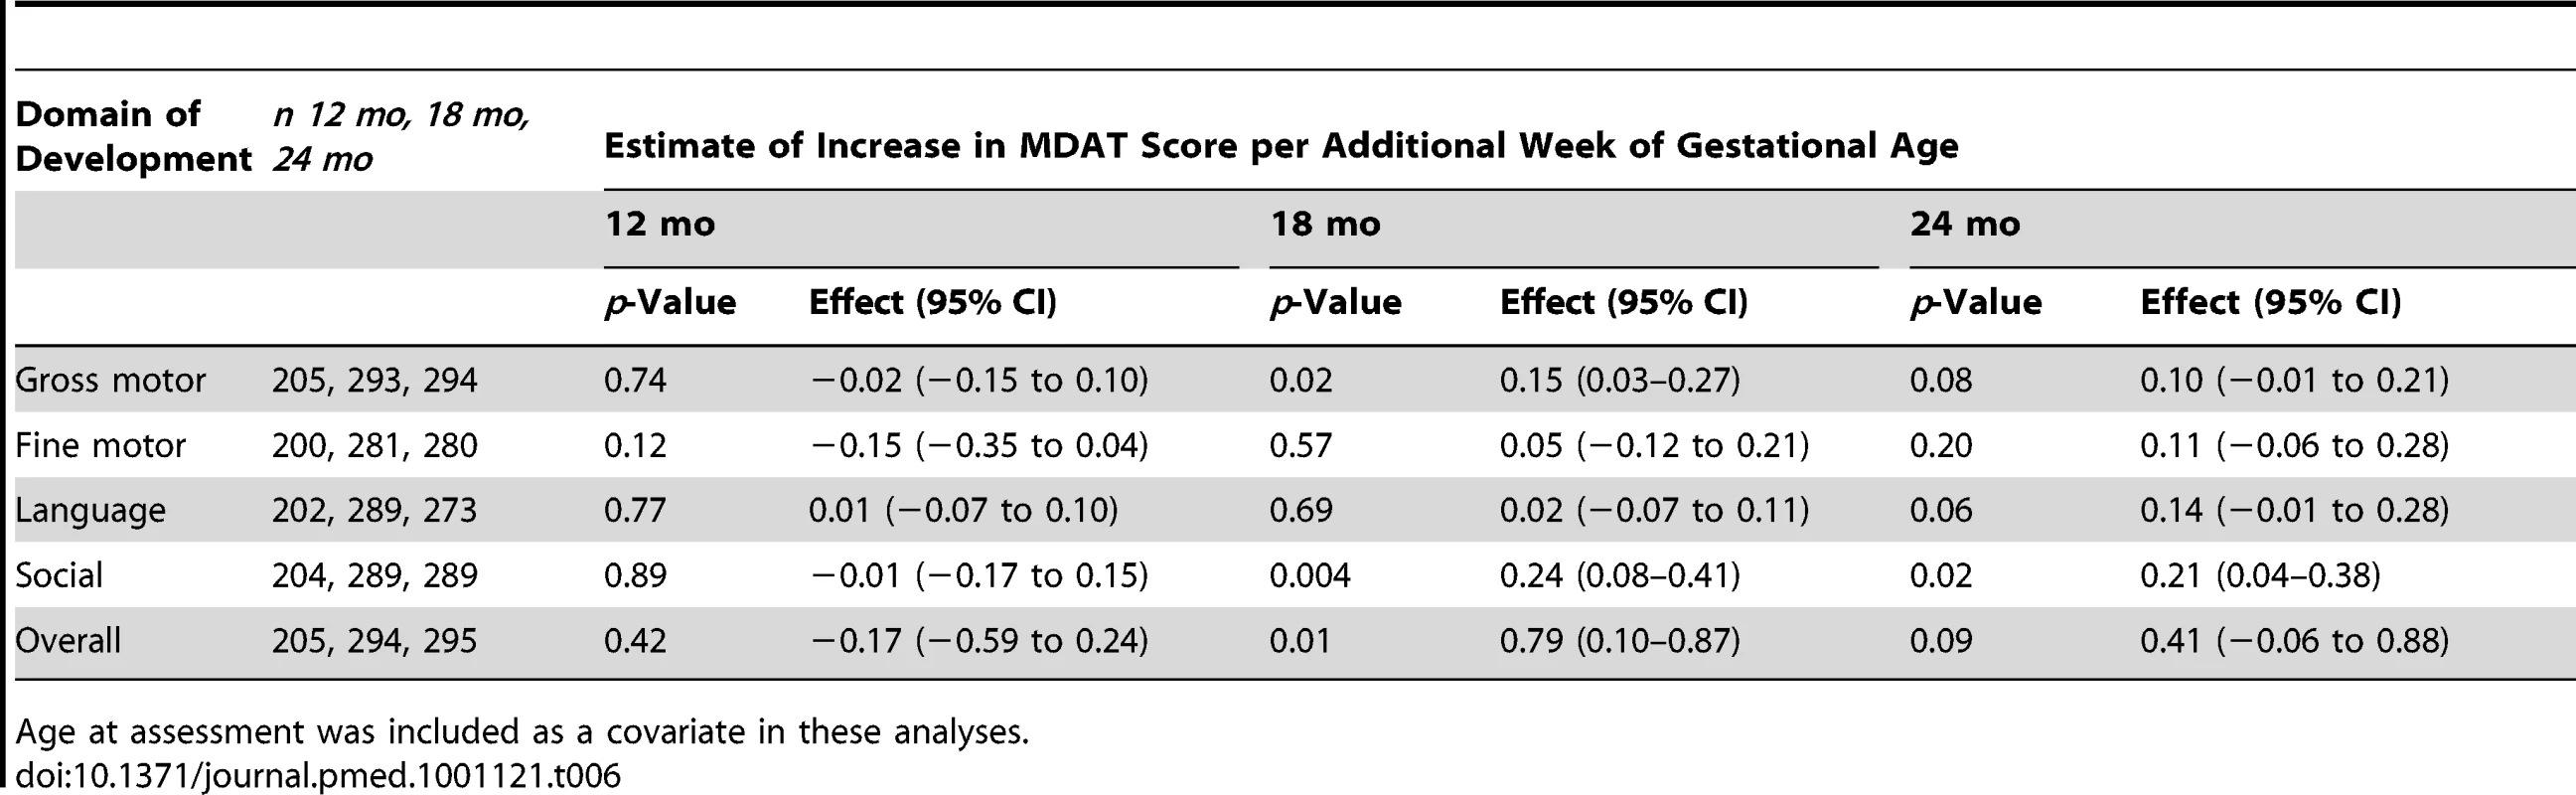 Summary of linear regression estimates of effect of gestational age at delivery and assessment age for MDAT scores.